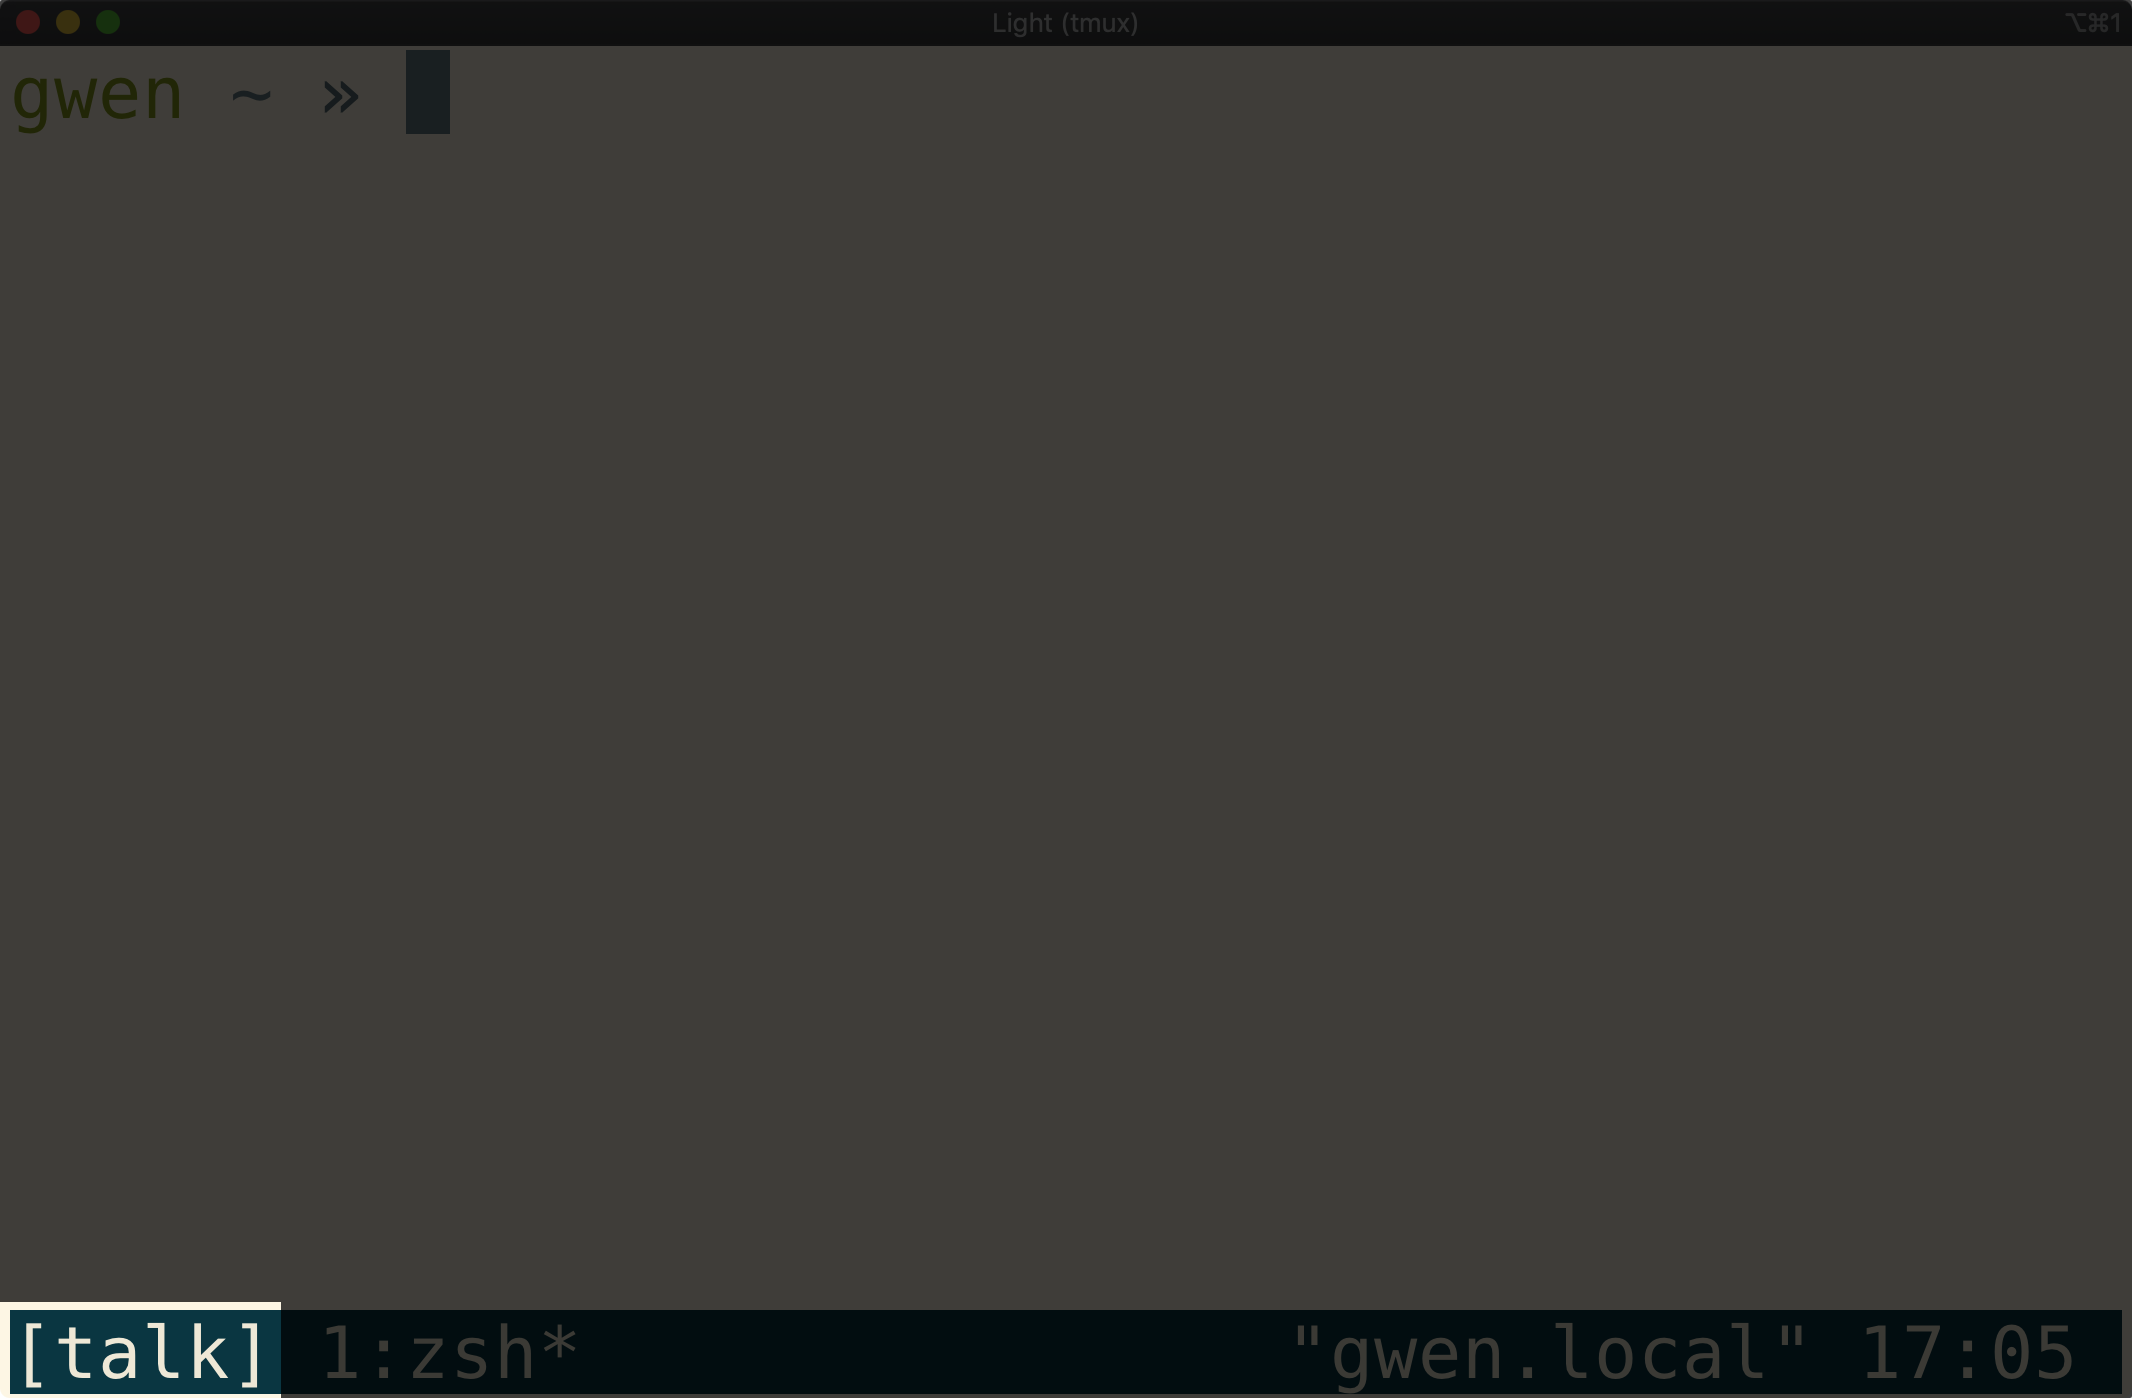 Tmux window highlighting session
name